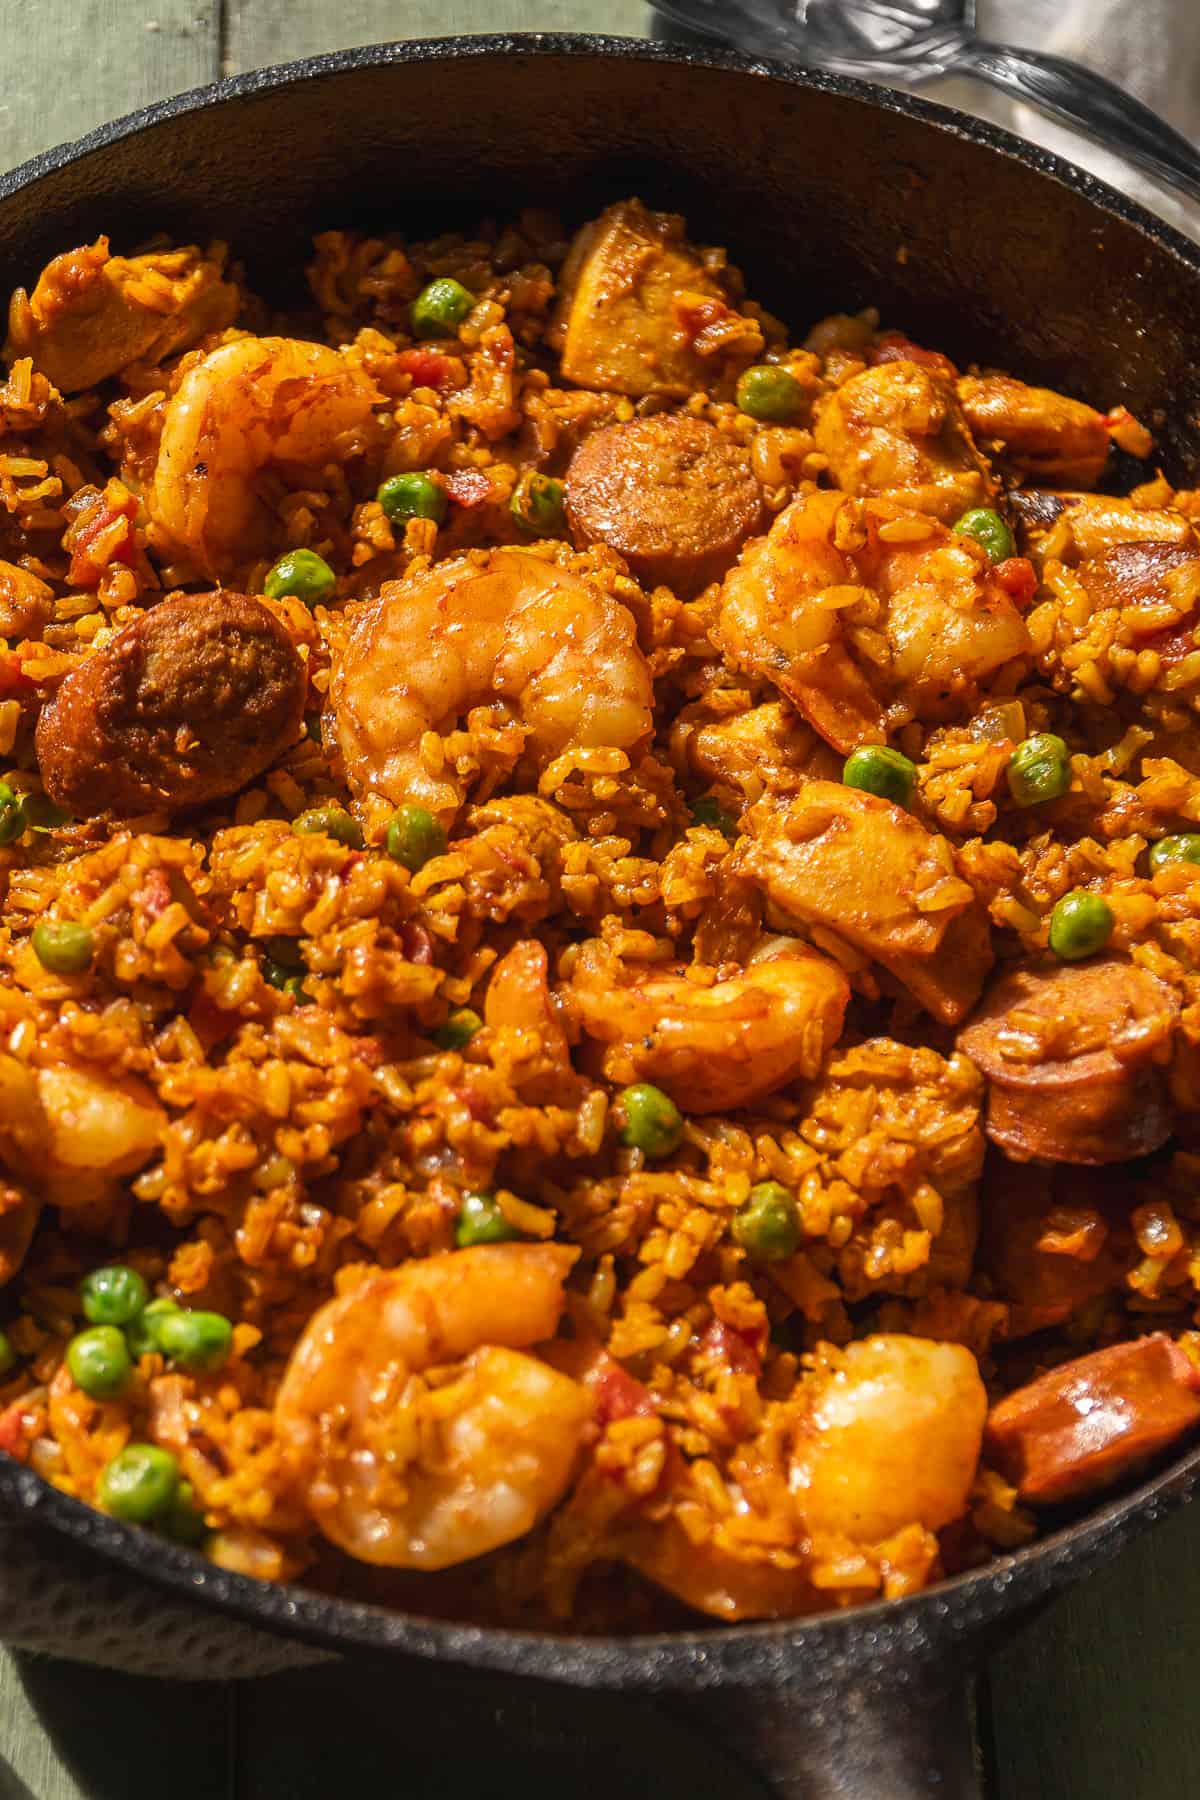 Chorizo and shrimp paella with brown rice and tomatoes.